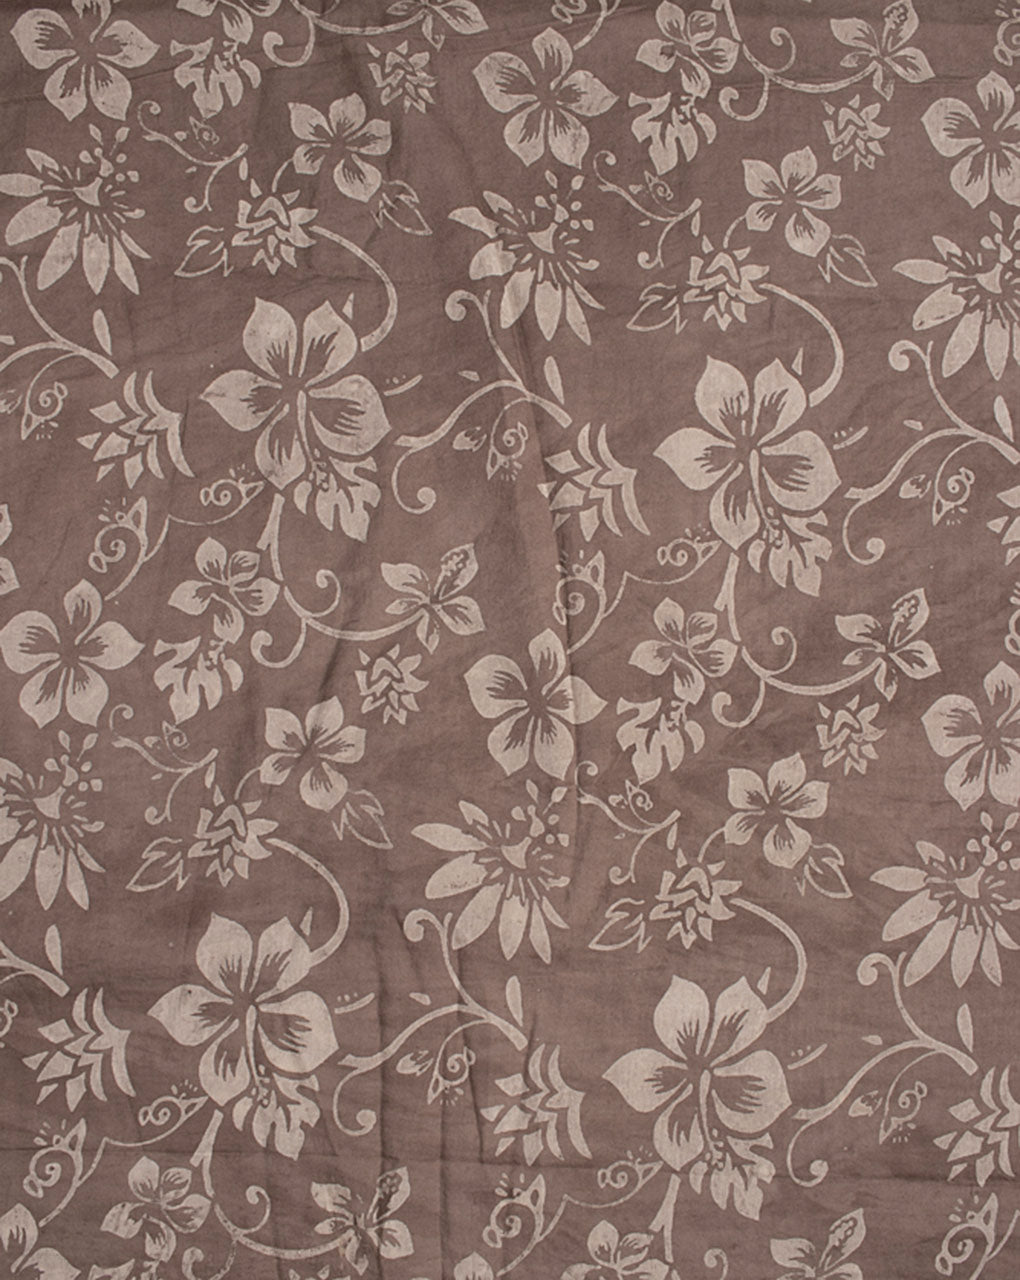 Matuu  Wild roses on white  floral wallpaper